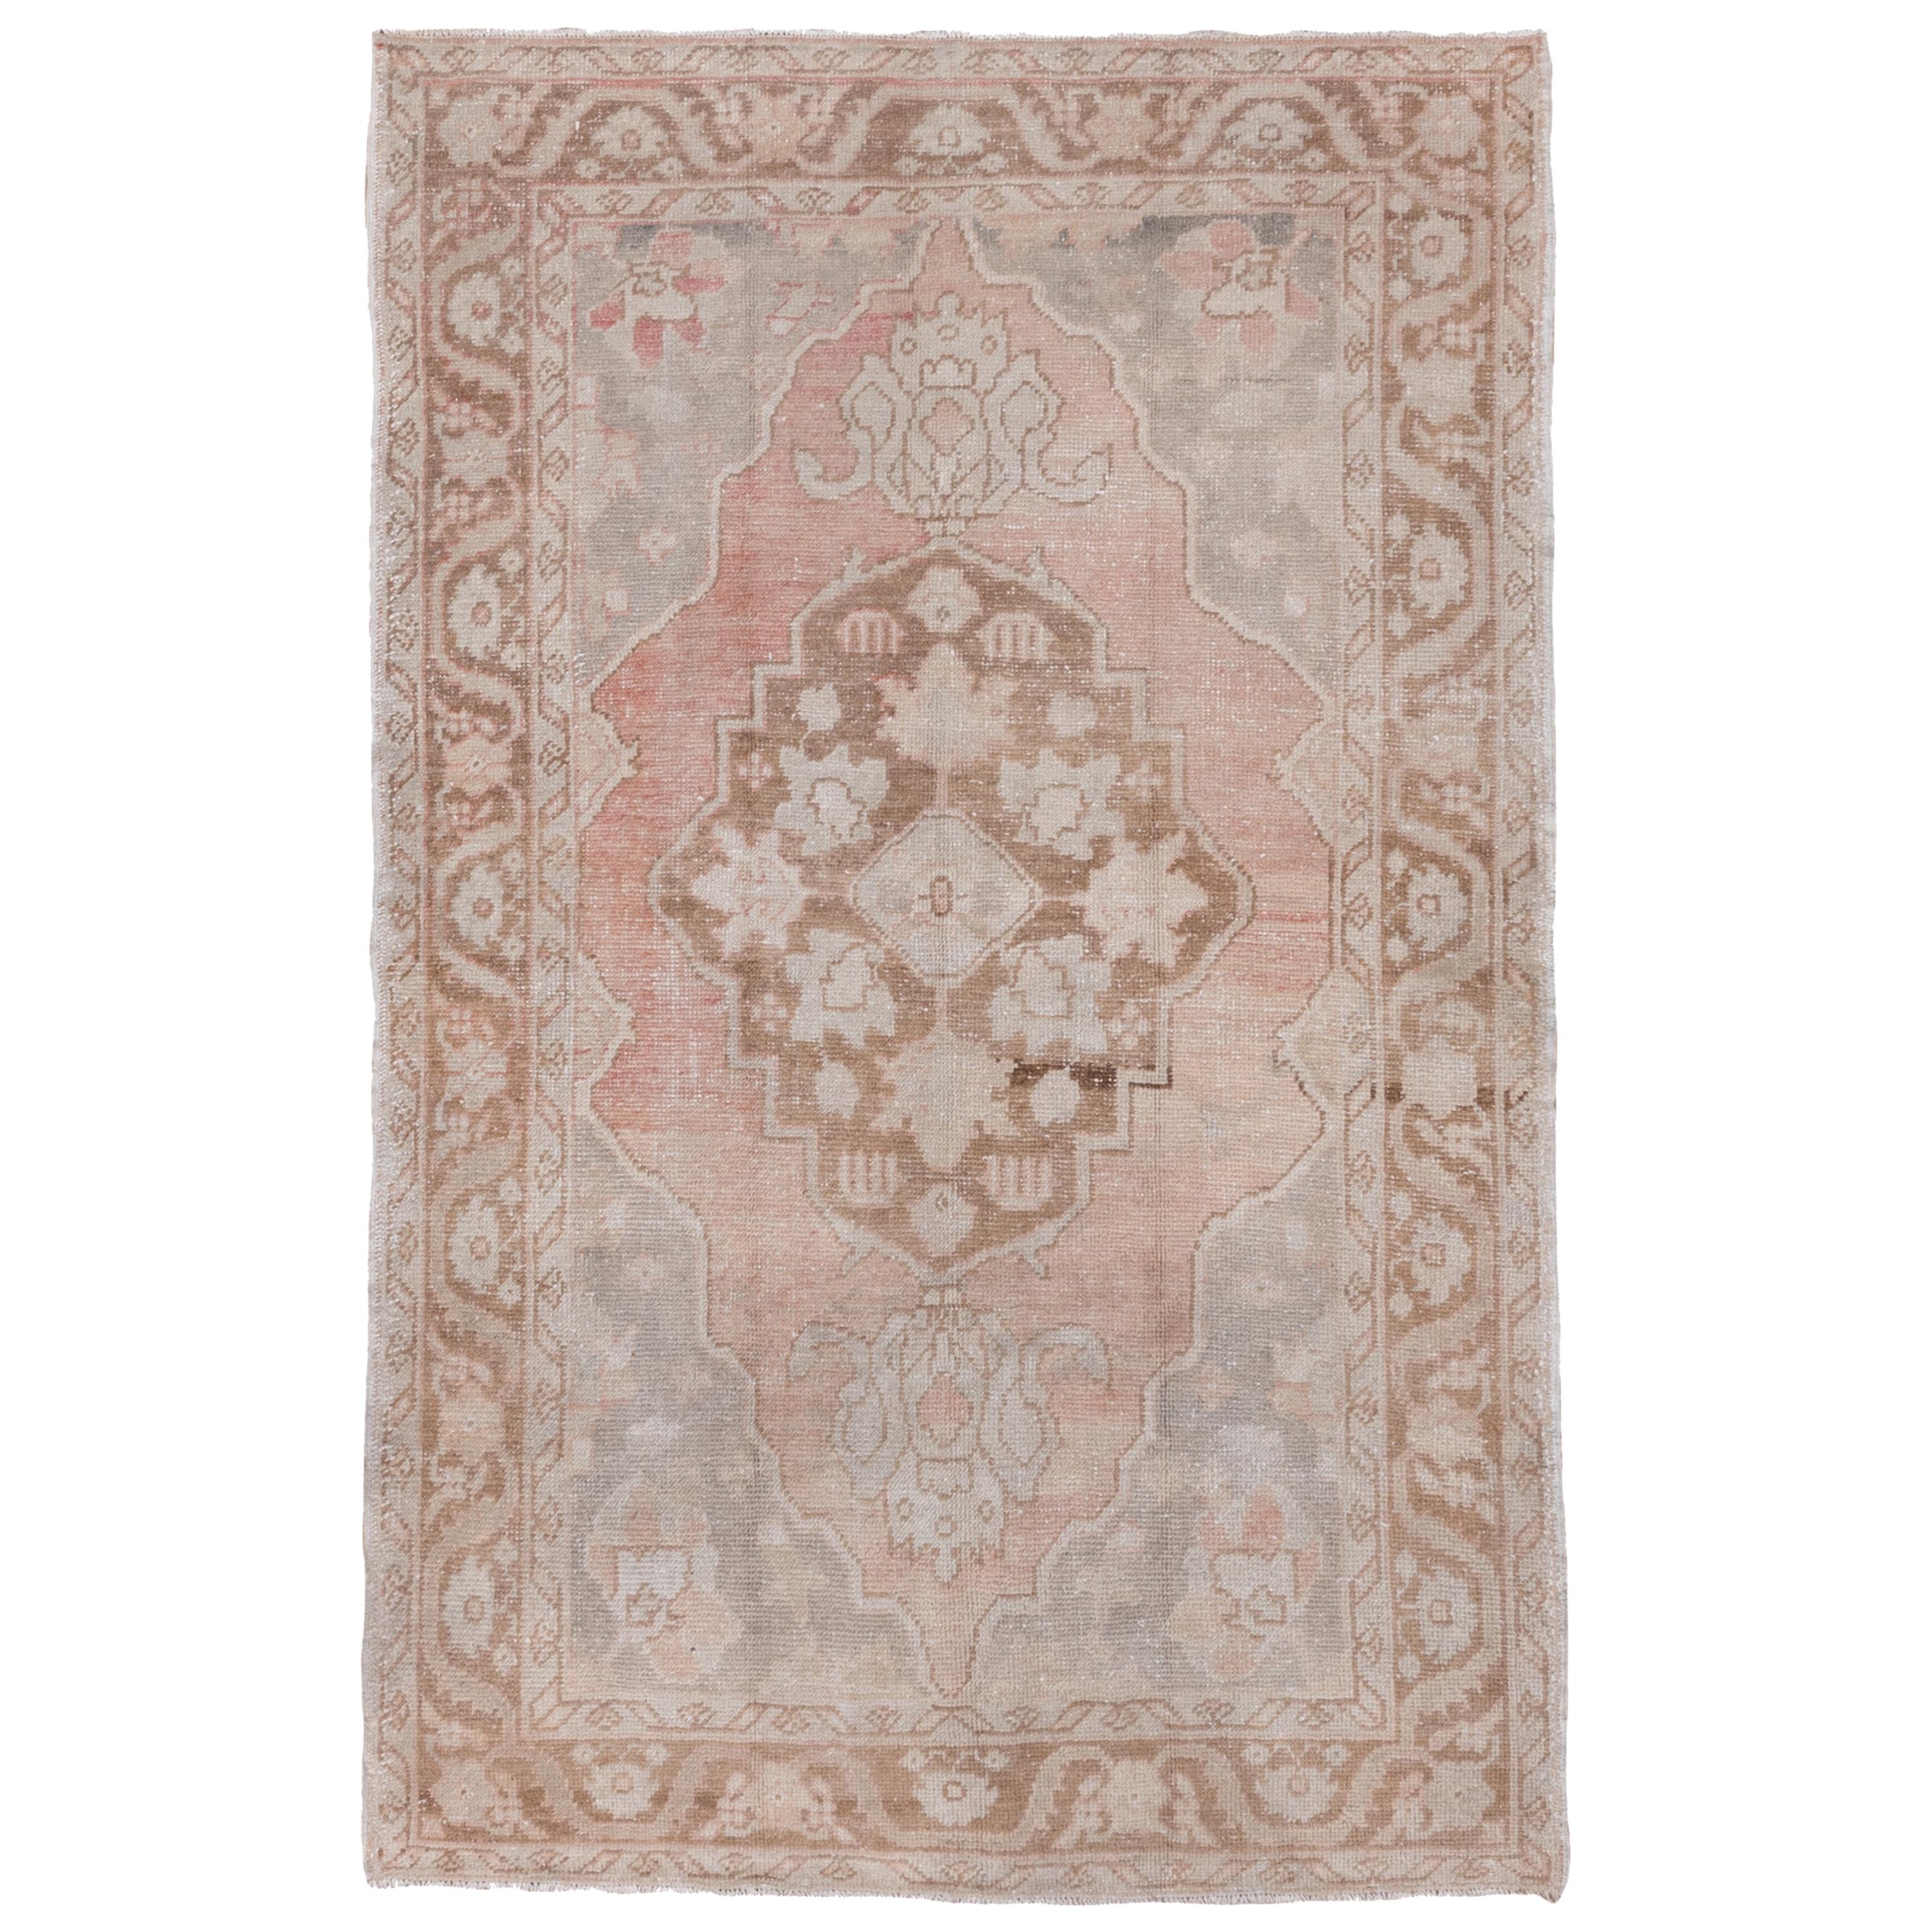 Antique Turkish Oushak Village Rug, Pink and Gray Field For Sale